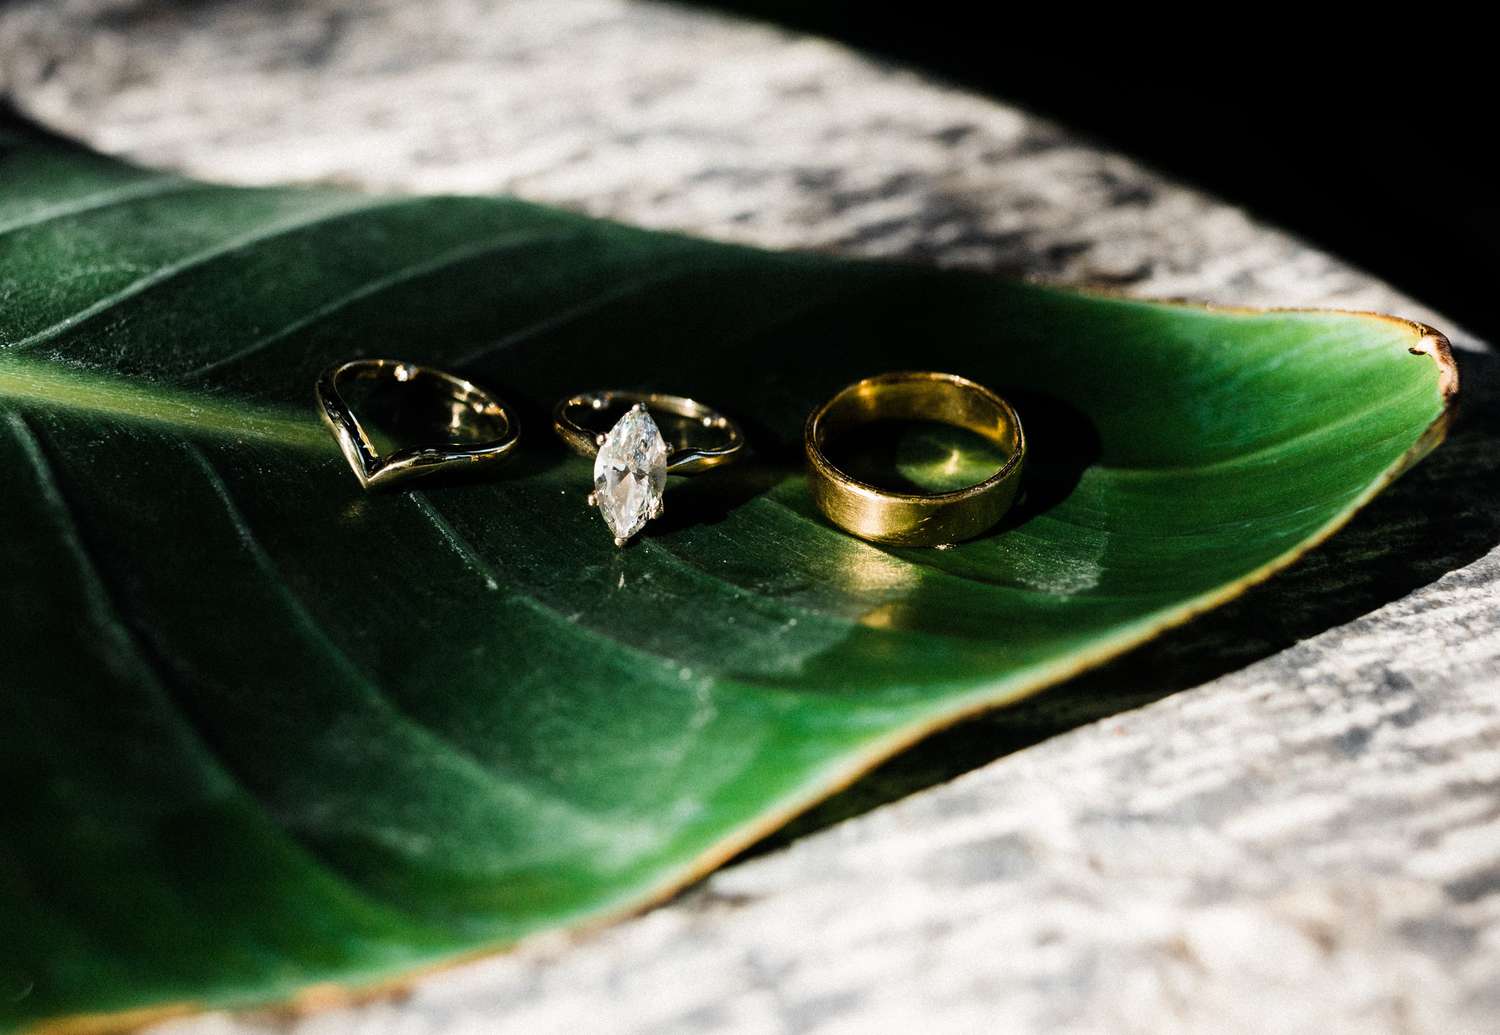 Wedding band, engagement ring, and wedding band resting on a leaf